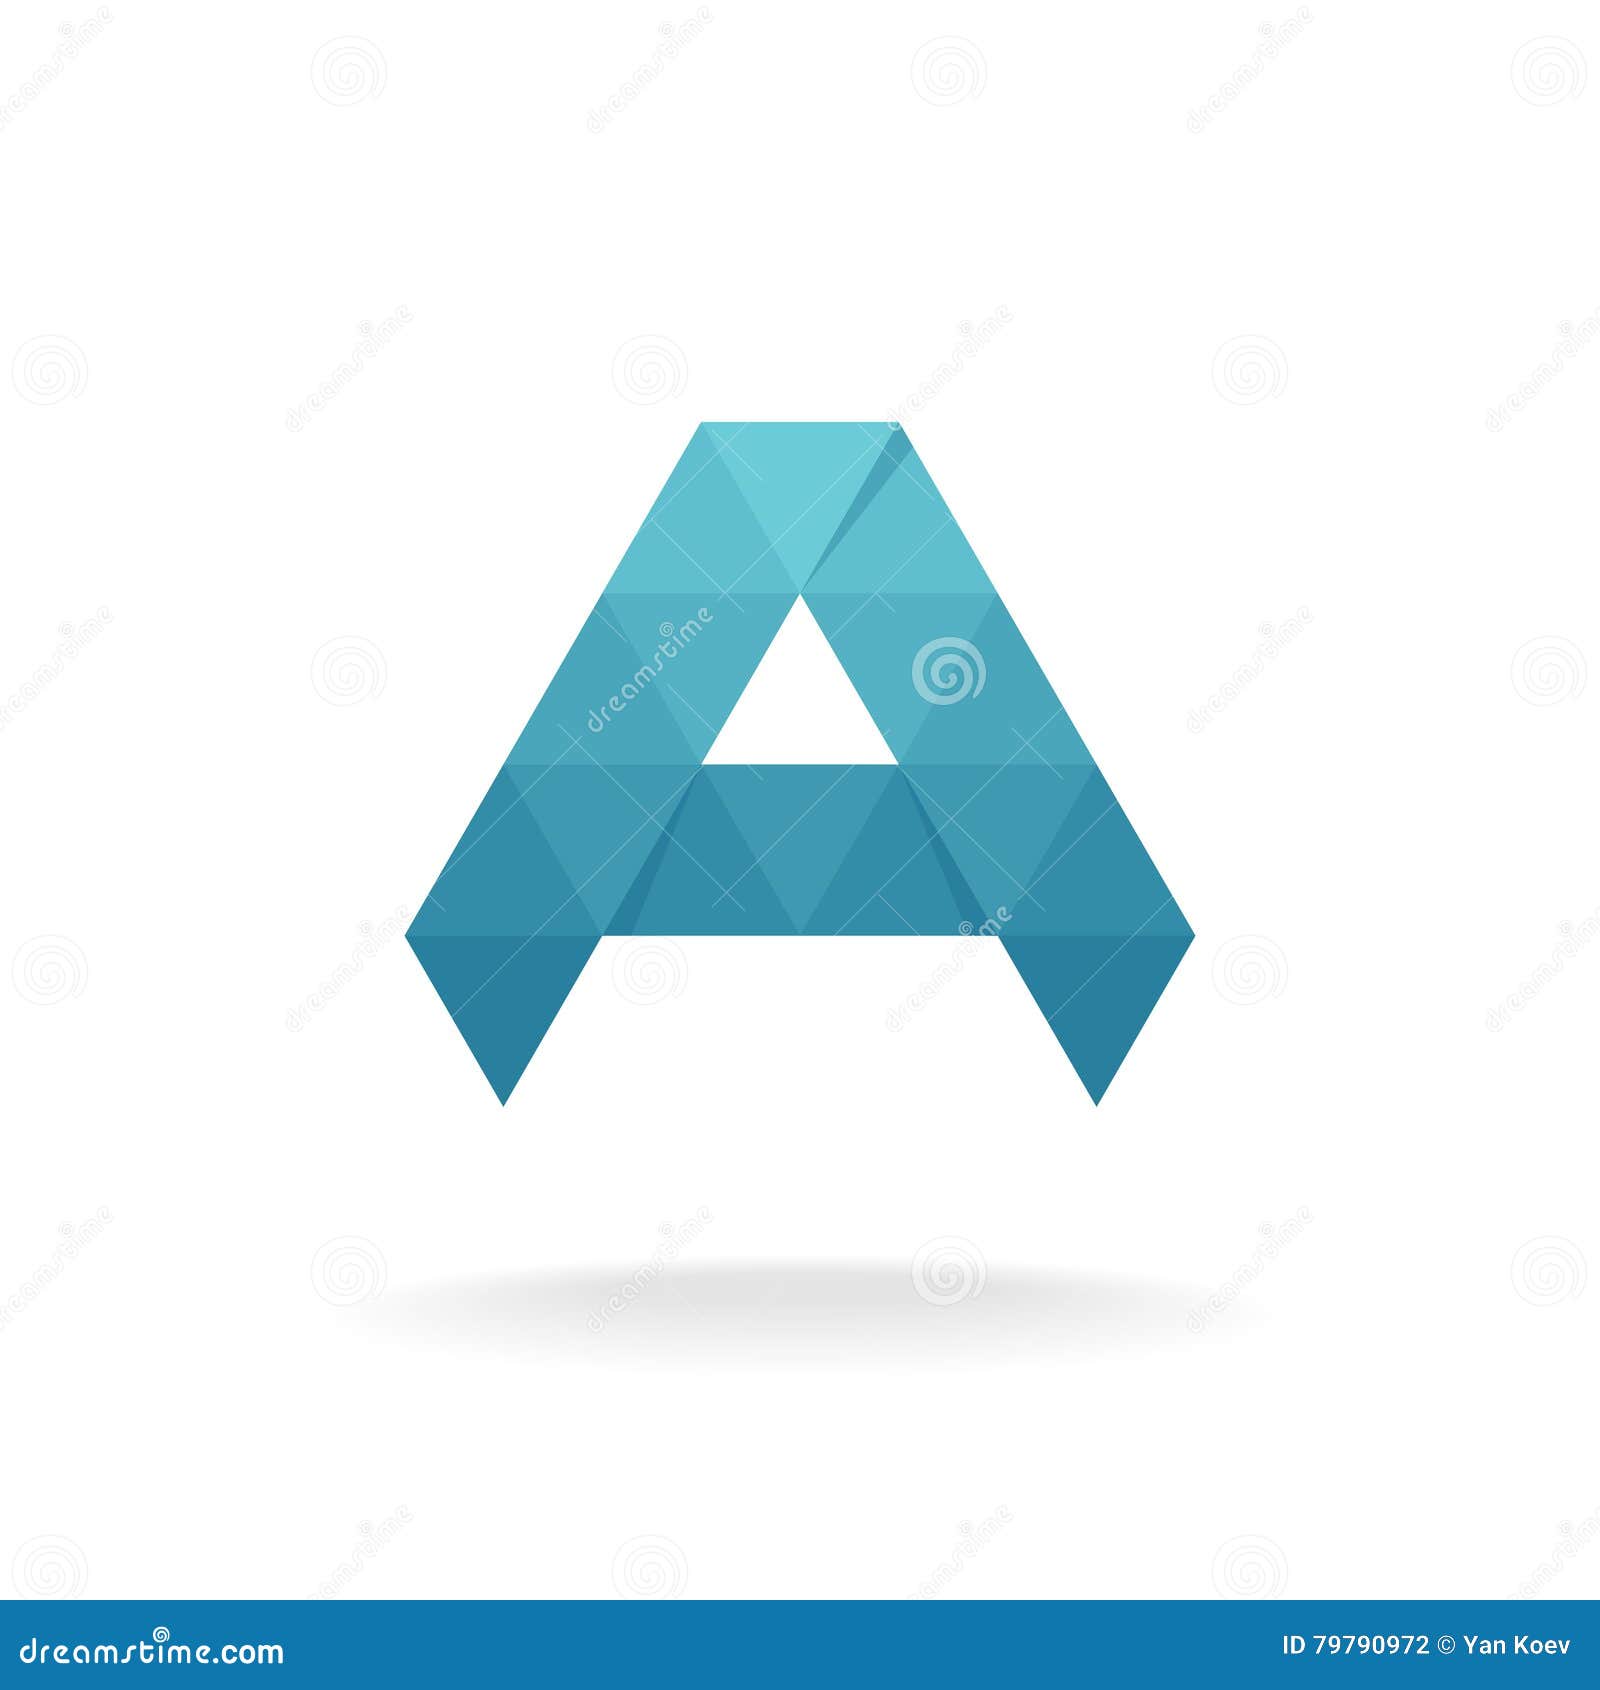 Aa Letter Logo Template. Triangle Polygons Style. Stock Vector ...